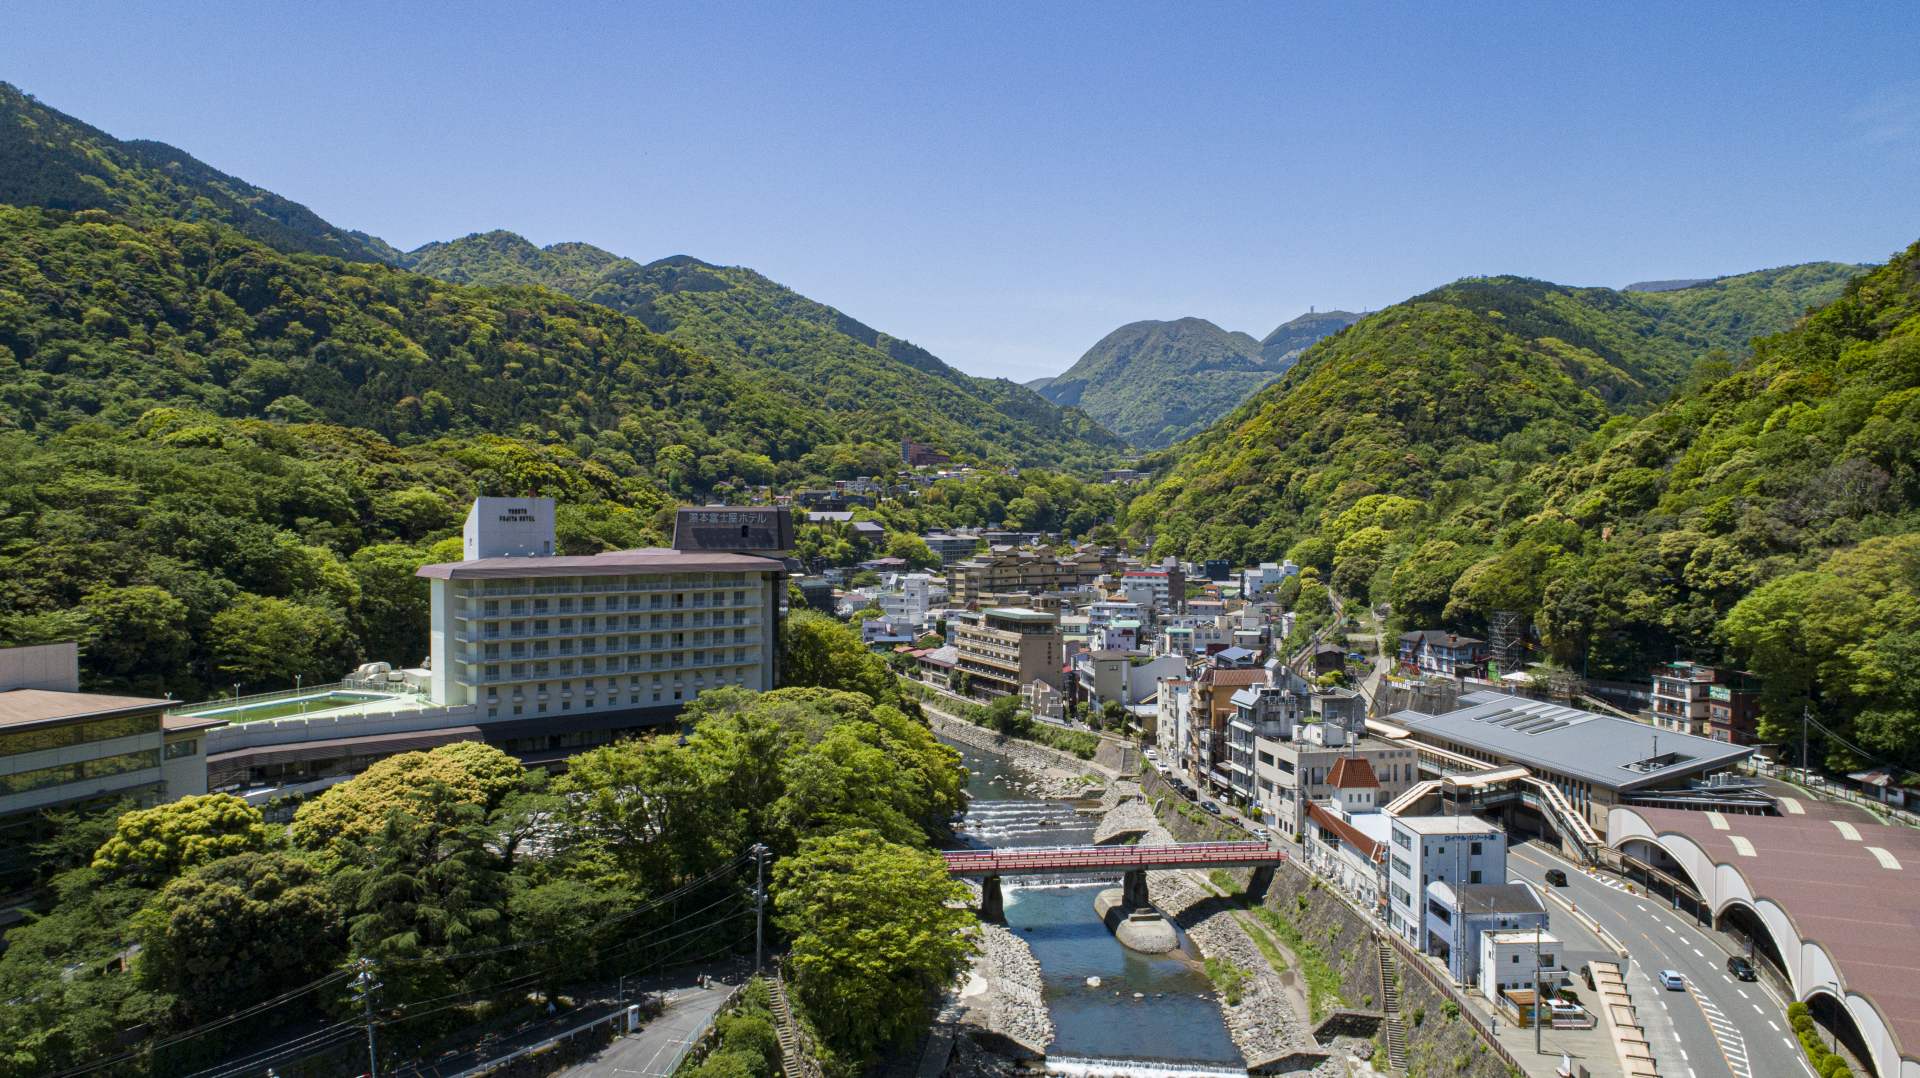 Hakone's largest hot spring resort area, with plenty of hot springs hubs to try along with stays, restaurants and shops.